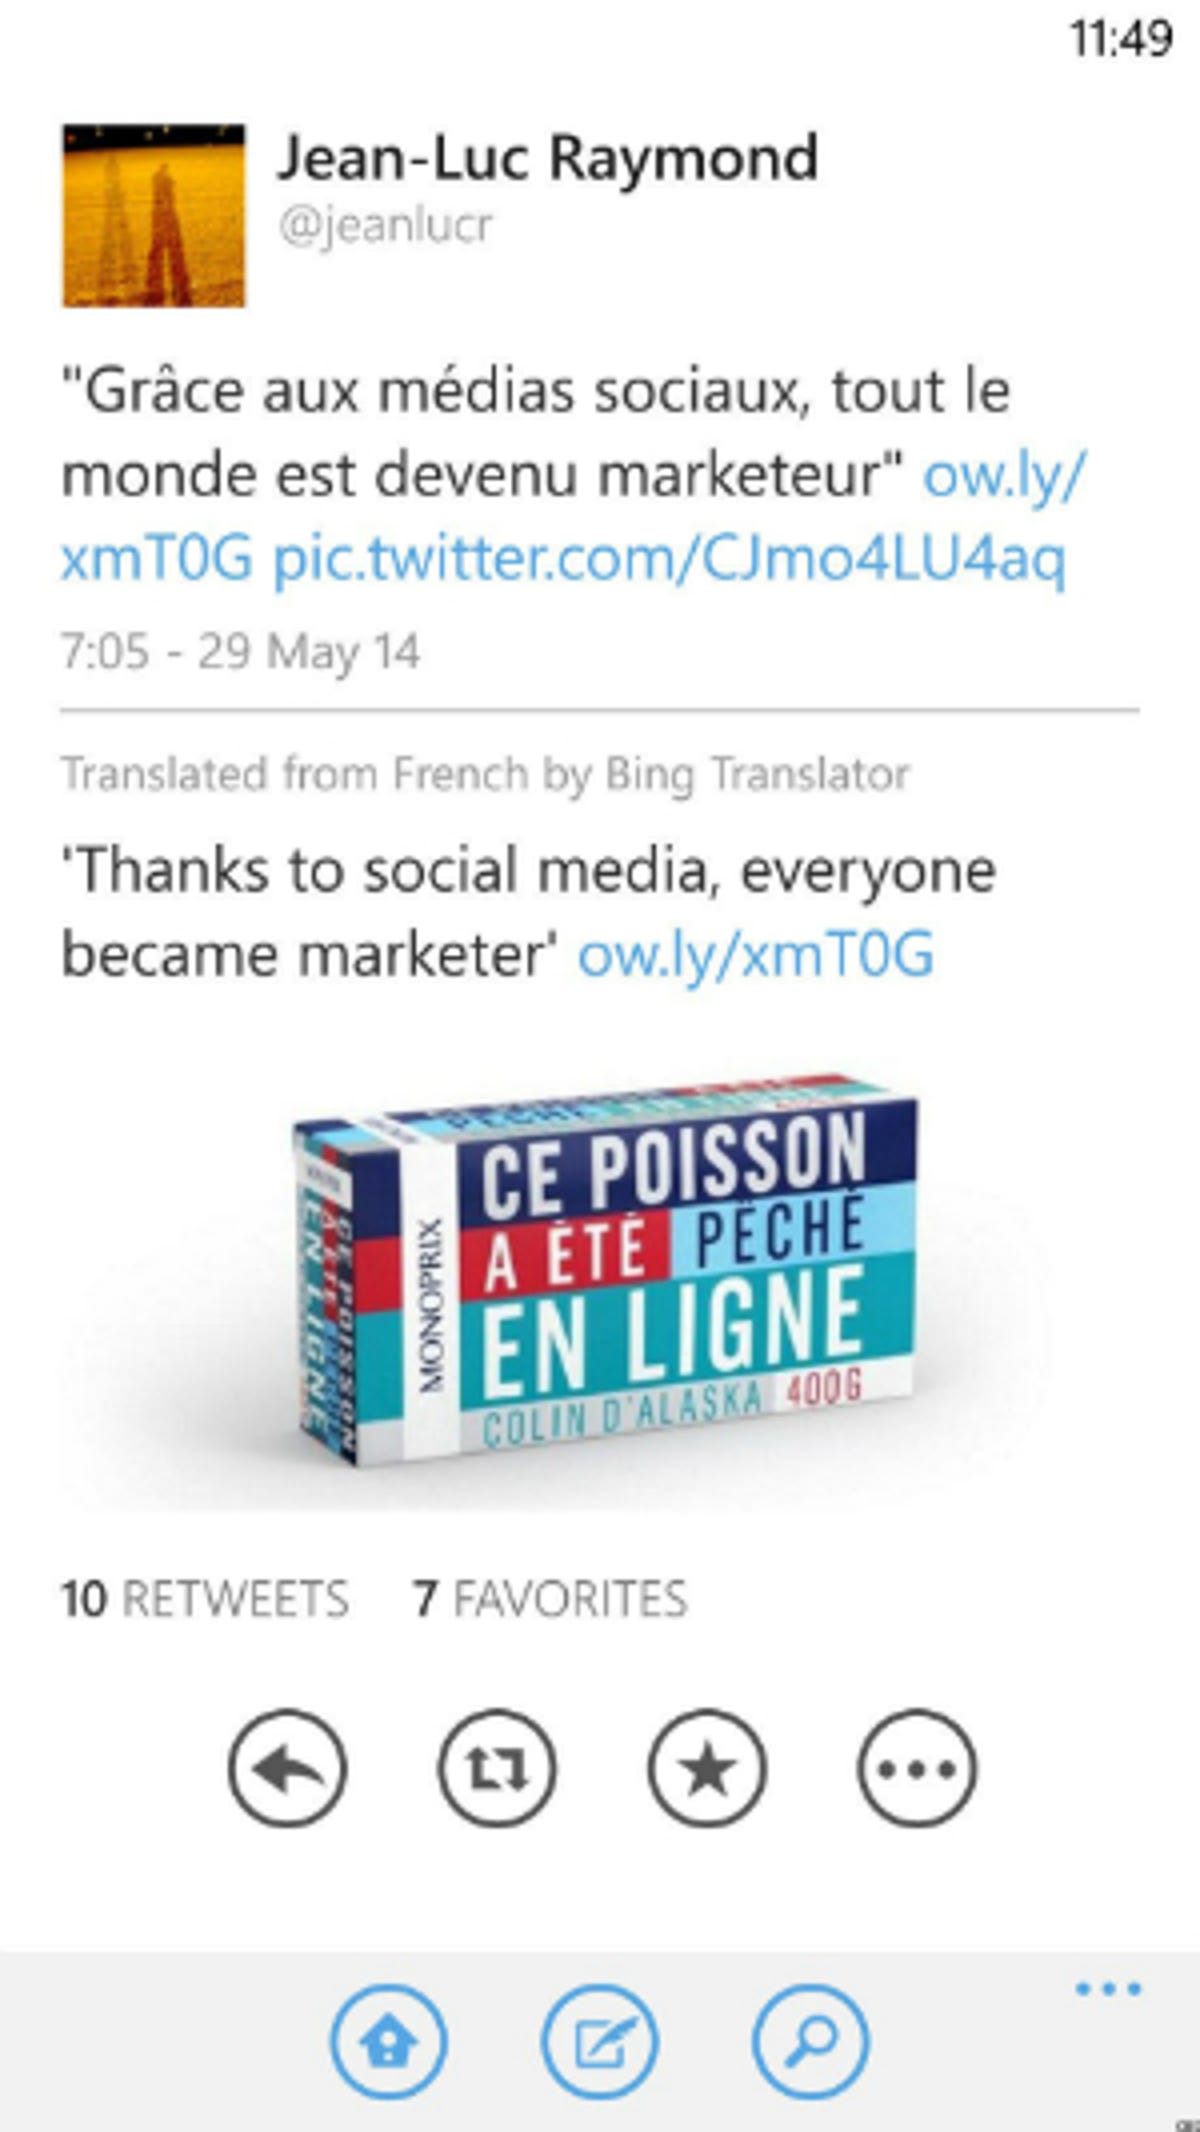 The Twitter app for Windows Phone 8 already offers Bing translation.